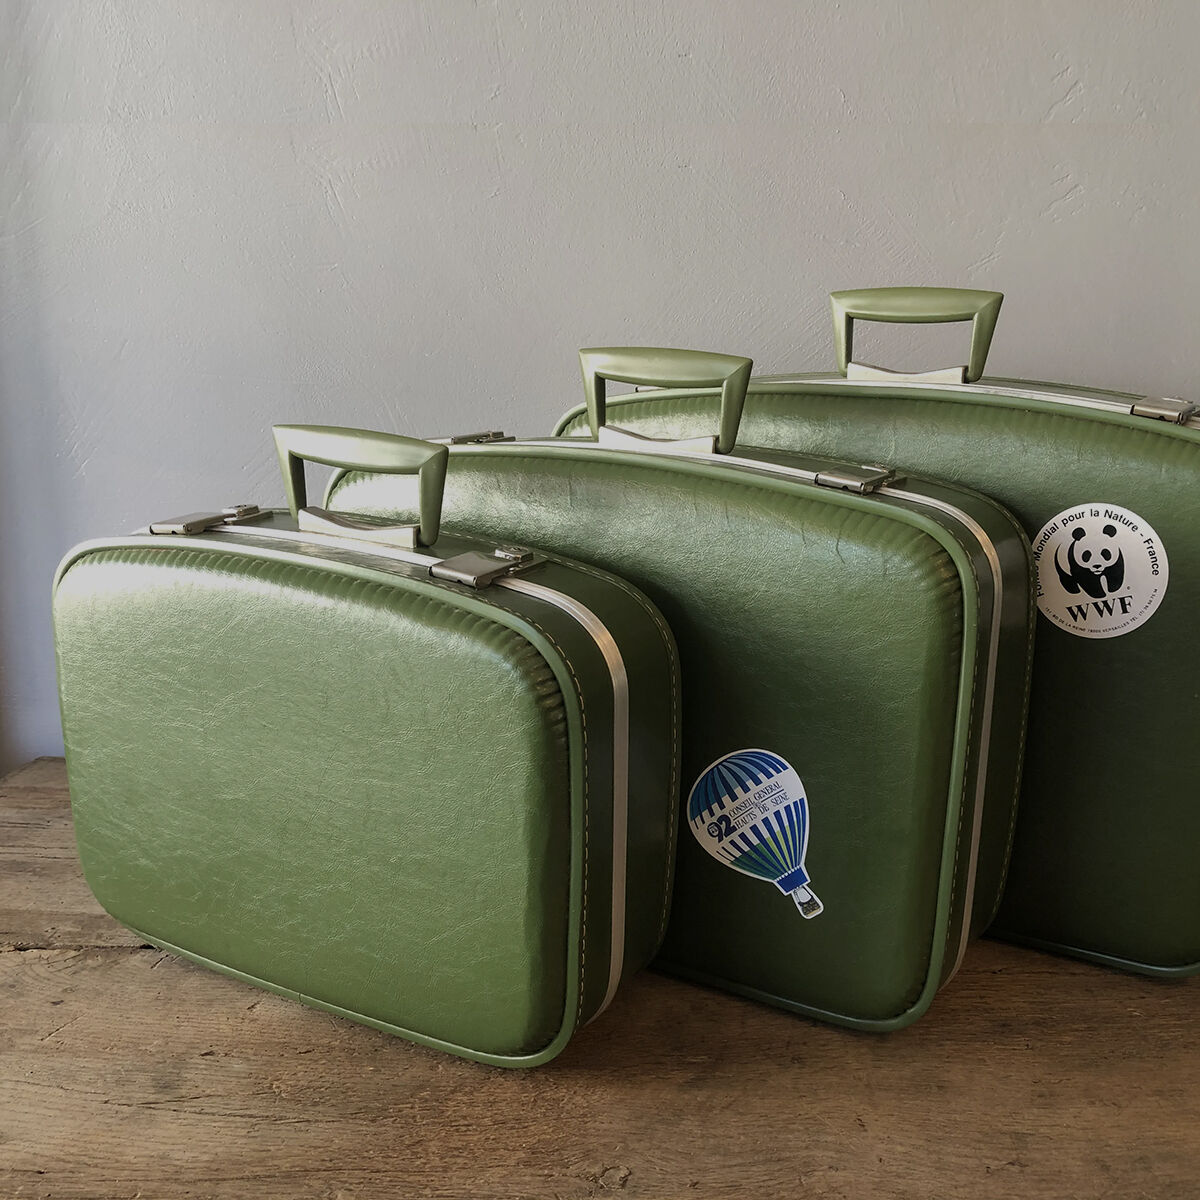 ALL OUR SUITCASES IN IMITATION LEATHER AND LEATHER